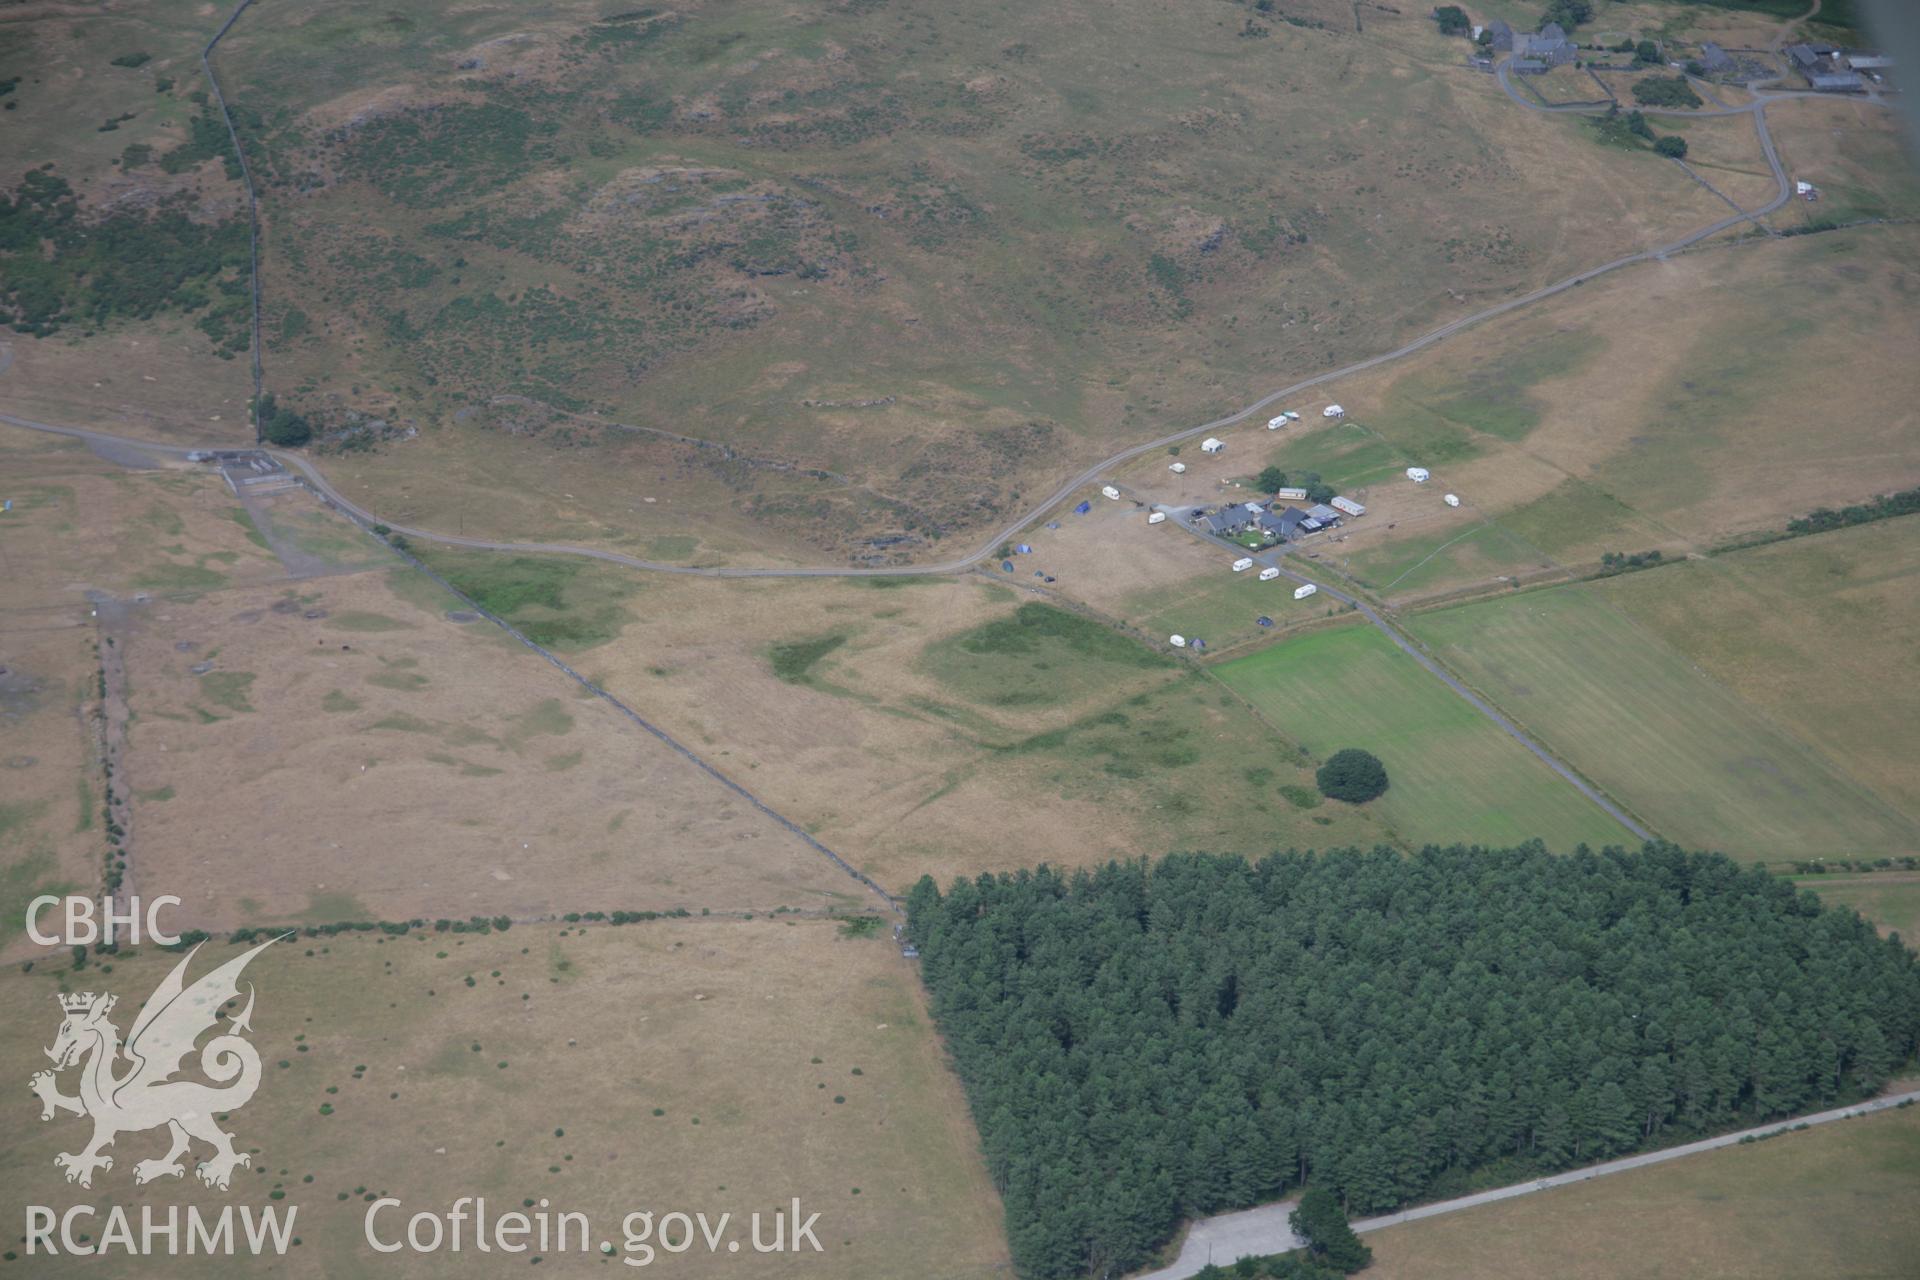 RCAHMW colour oblique aerial photograph of Tanforhesgan Enclosure. Taken on 25 July 2006 by Toby Driver.